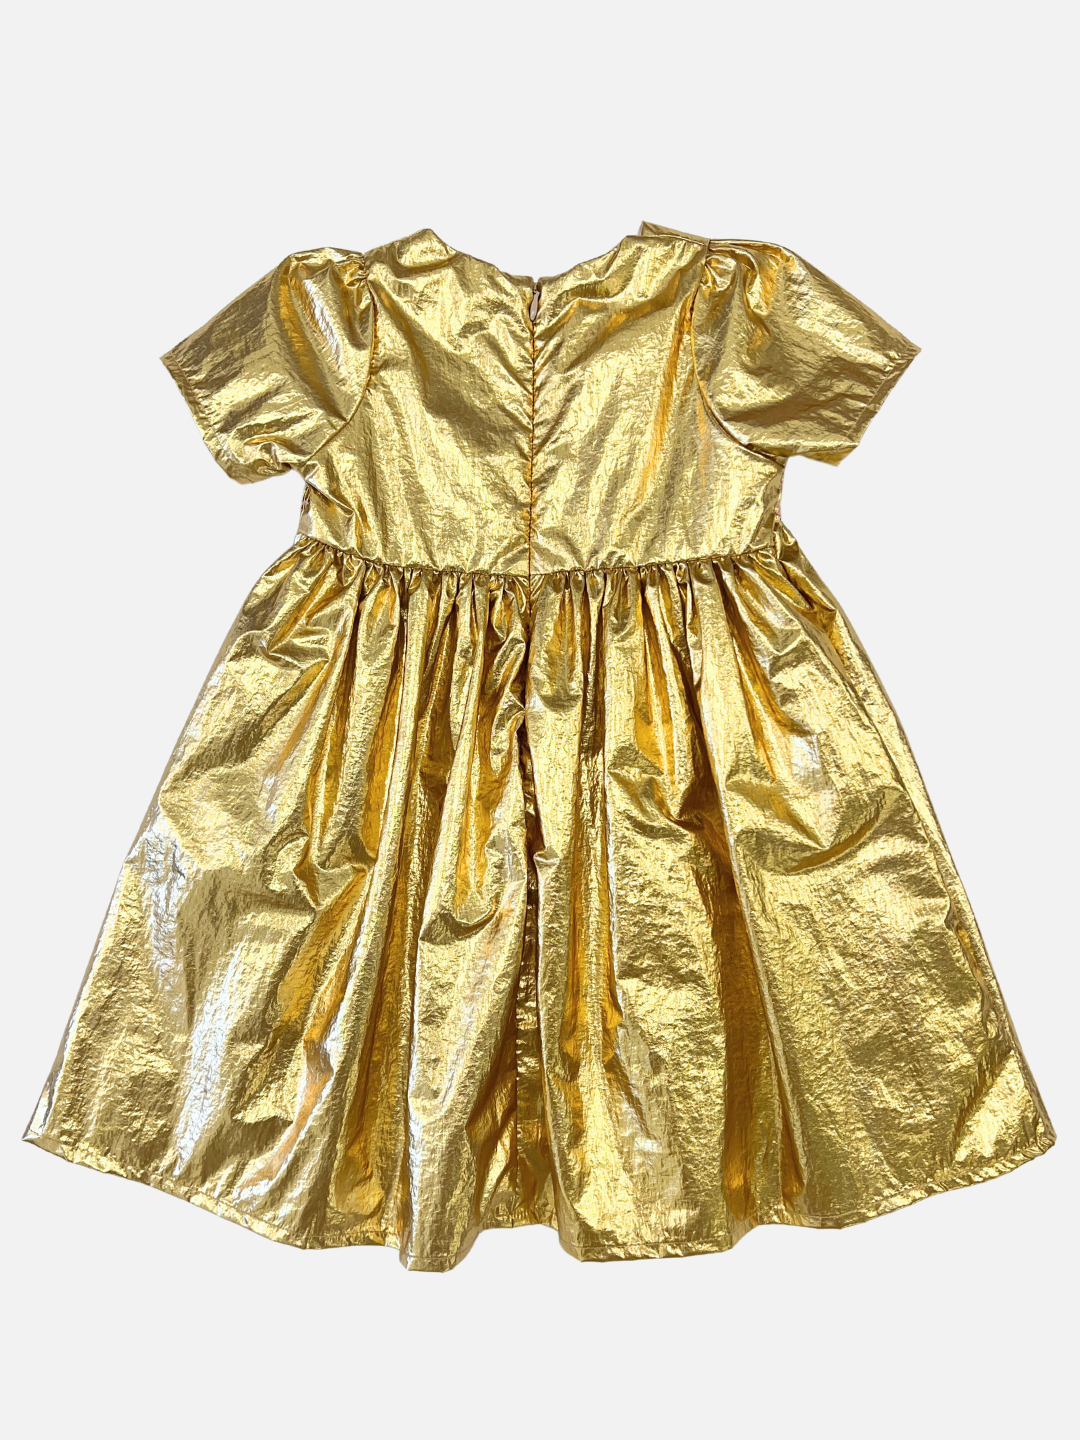 Gold | Back view of kids party dress in yellow gold metallic fabric with a round neck, short sleeves, empire waist and full skirt.